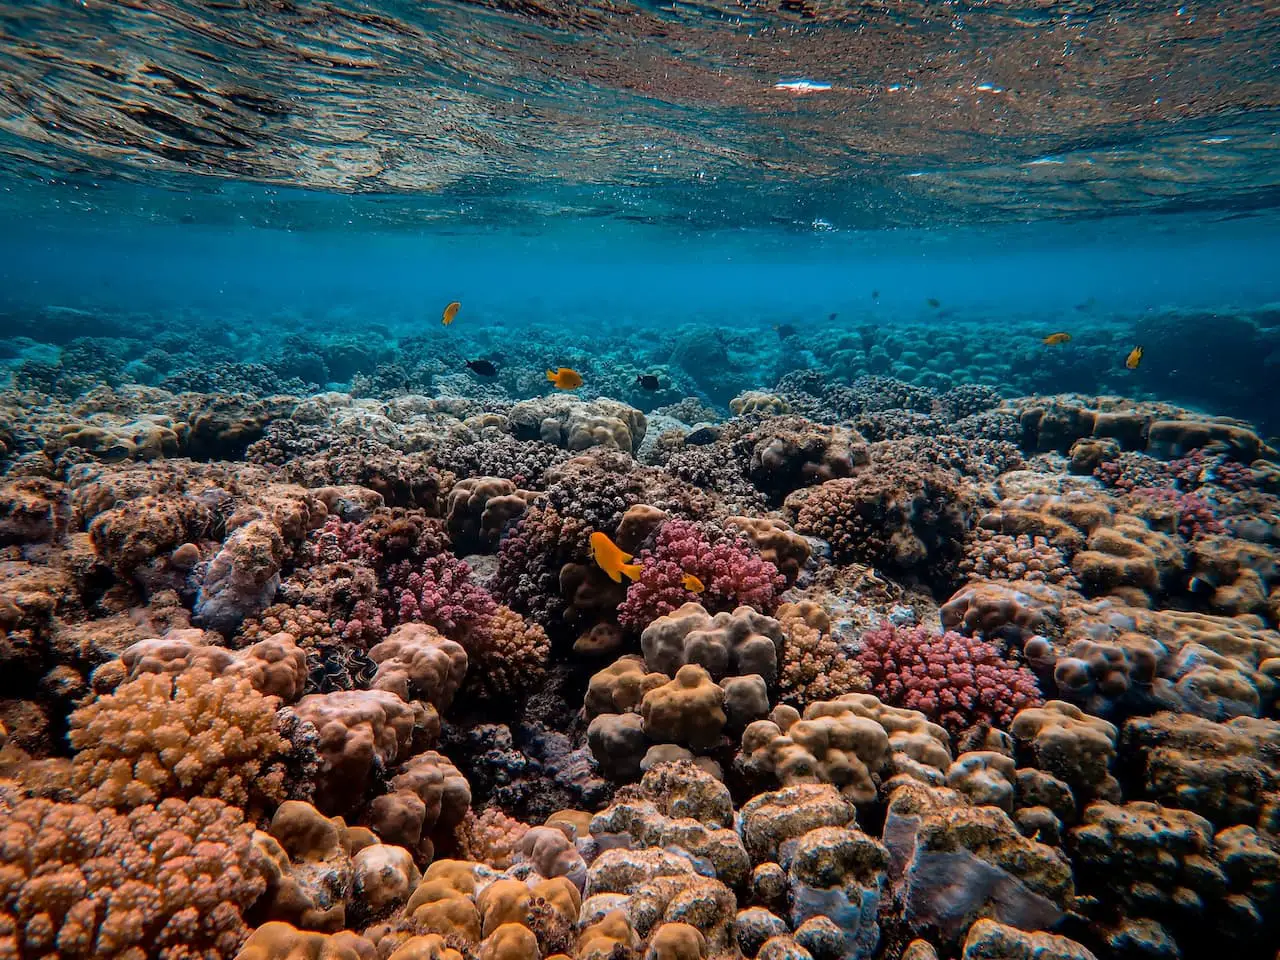 Shallow Coral Reef With Fish